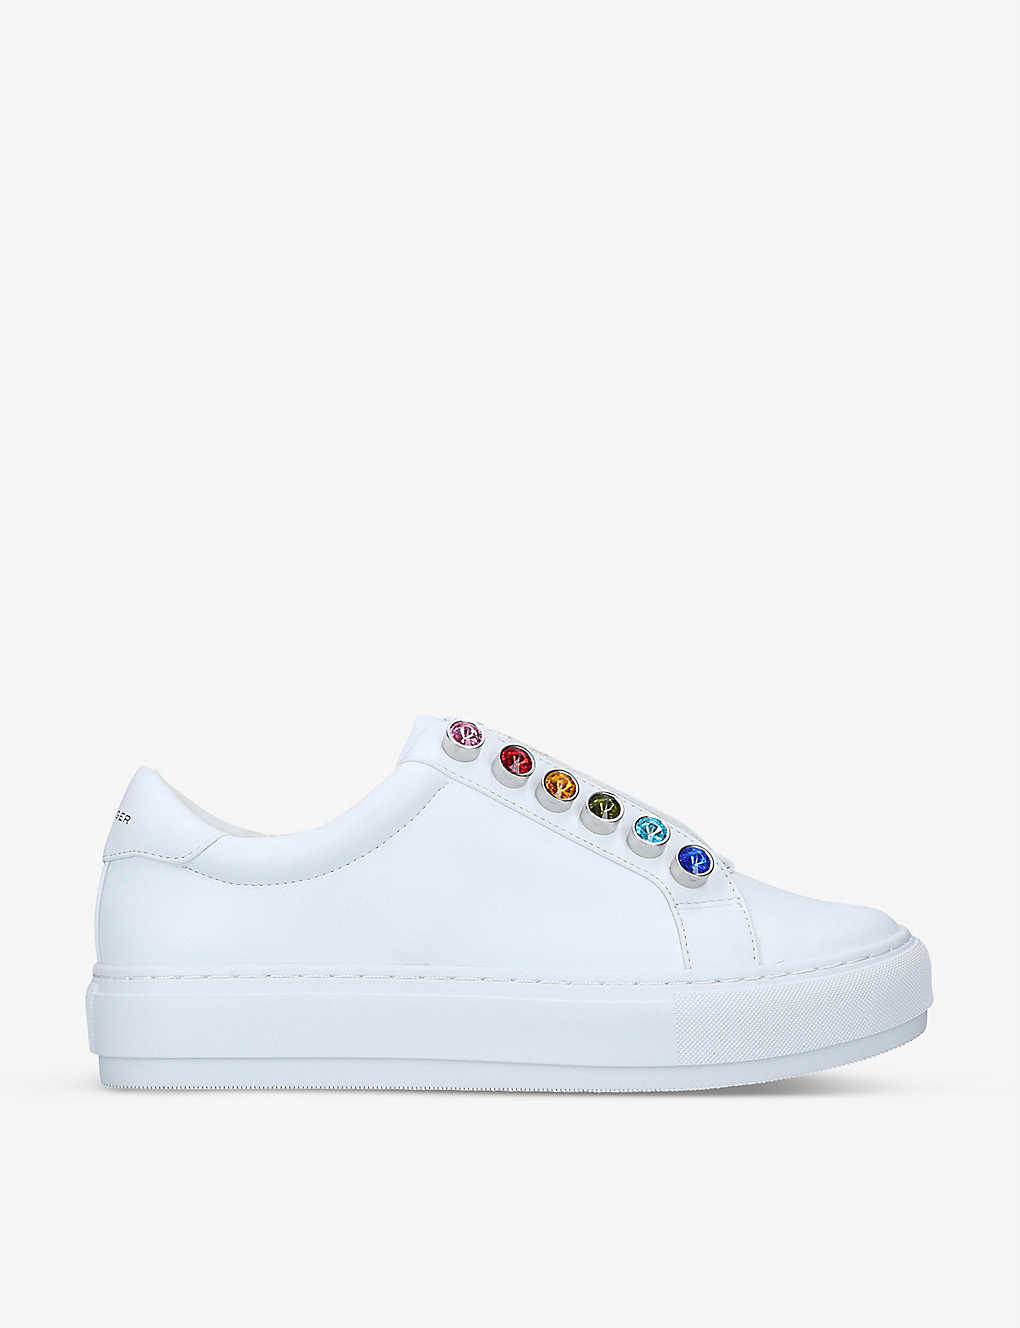 Shop Kurt Geiger London Women's White/comb Liviah Embellished Leather Trainers